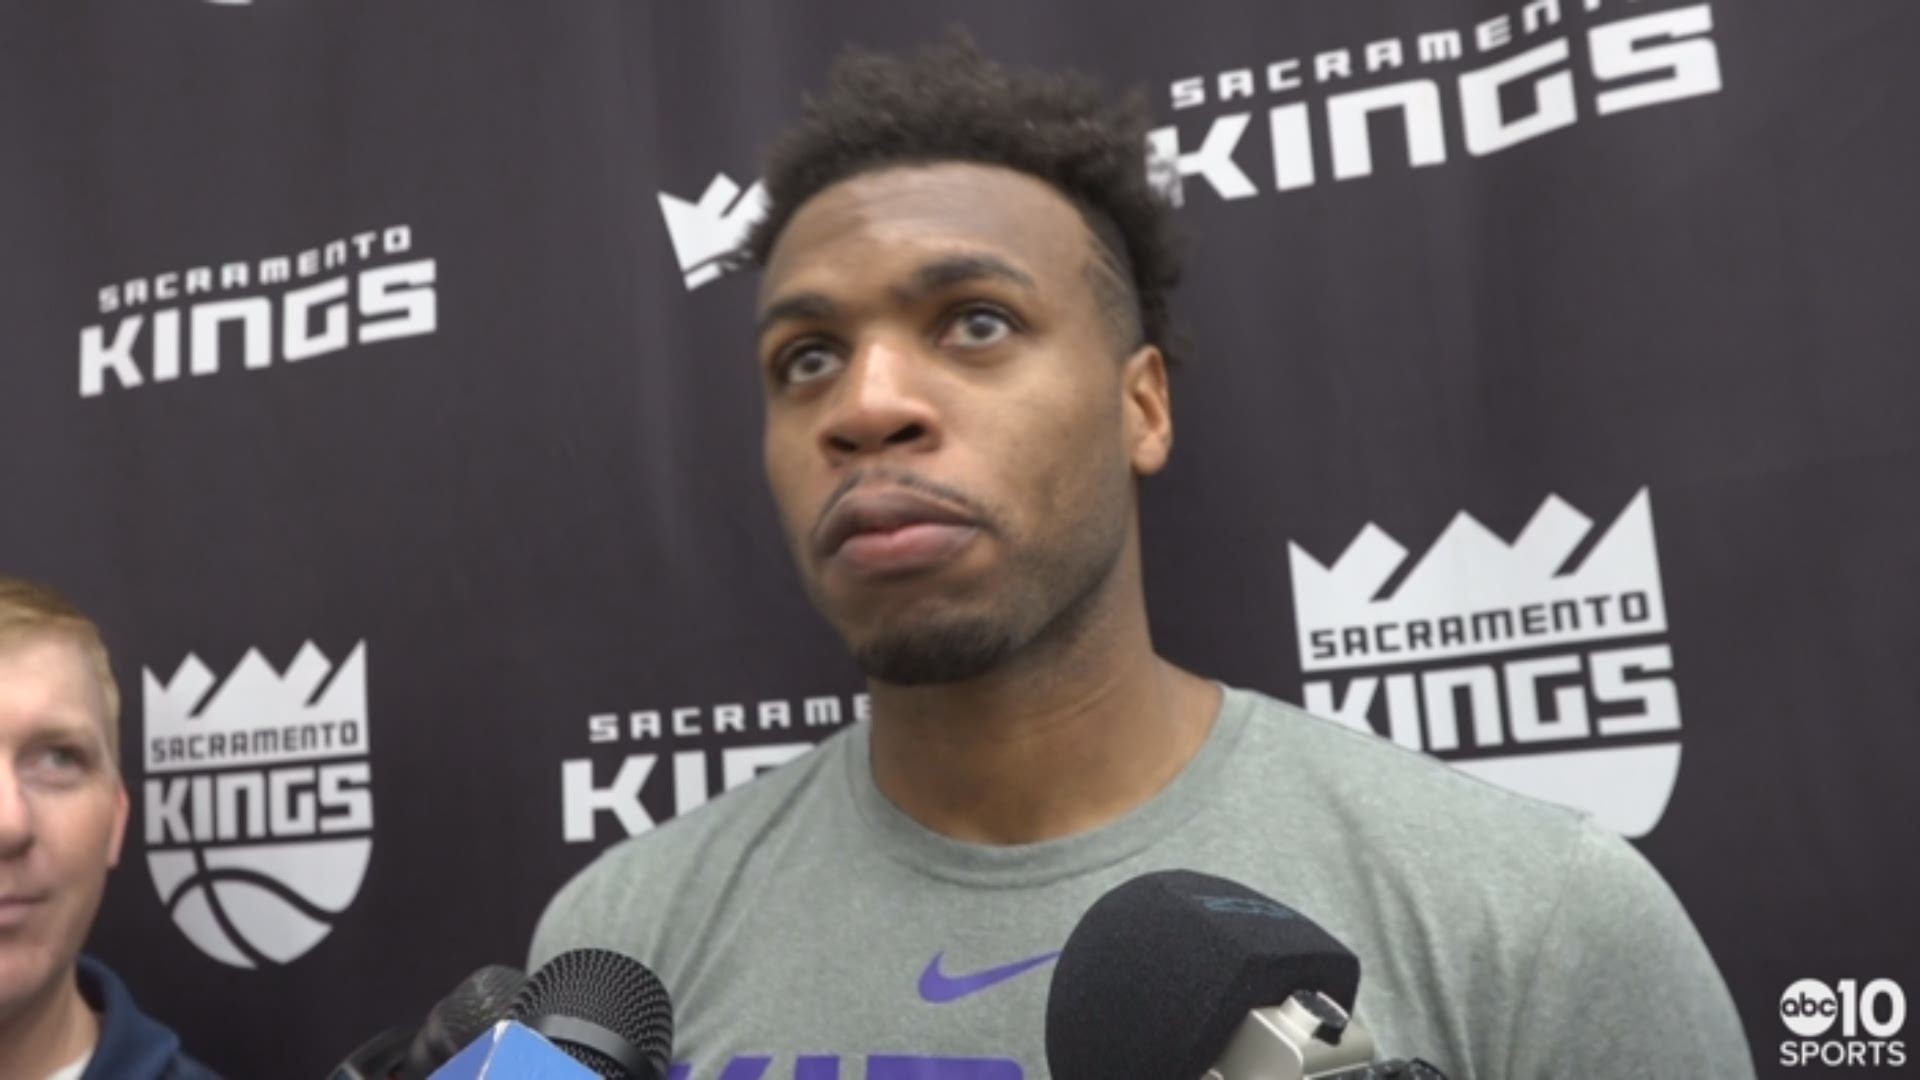 Kings guard Buddy Hield talks about the fast improvement his team is making, seeing others praise his team's successful start to the season and shaking off his poor performance against the Lakers last Saturday.